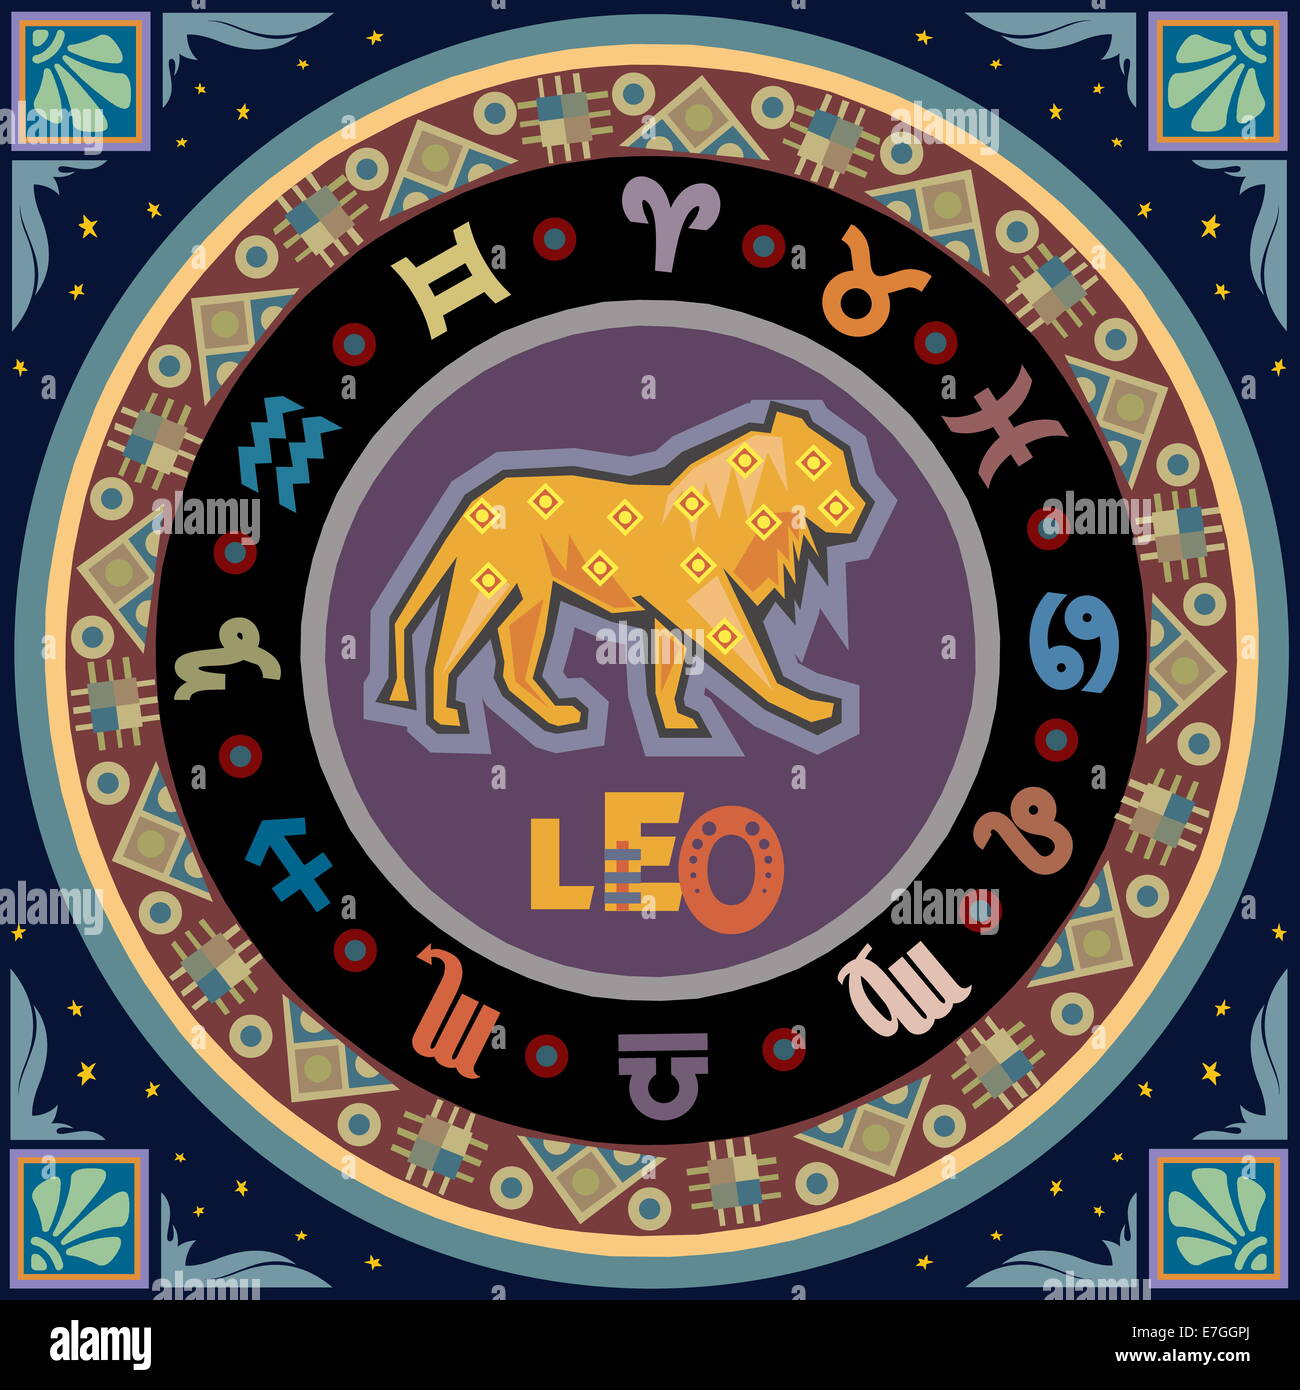 Horoscope Zodiac sign illustration. Please find another sign in the same series. Stock Photo